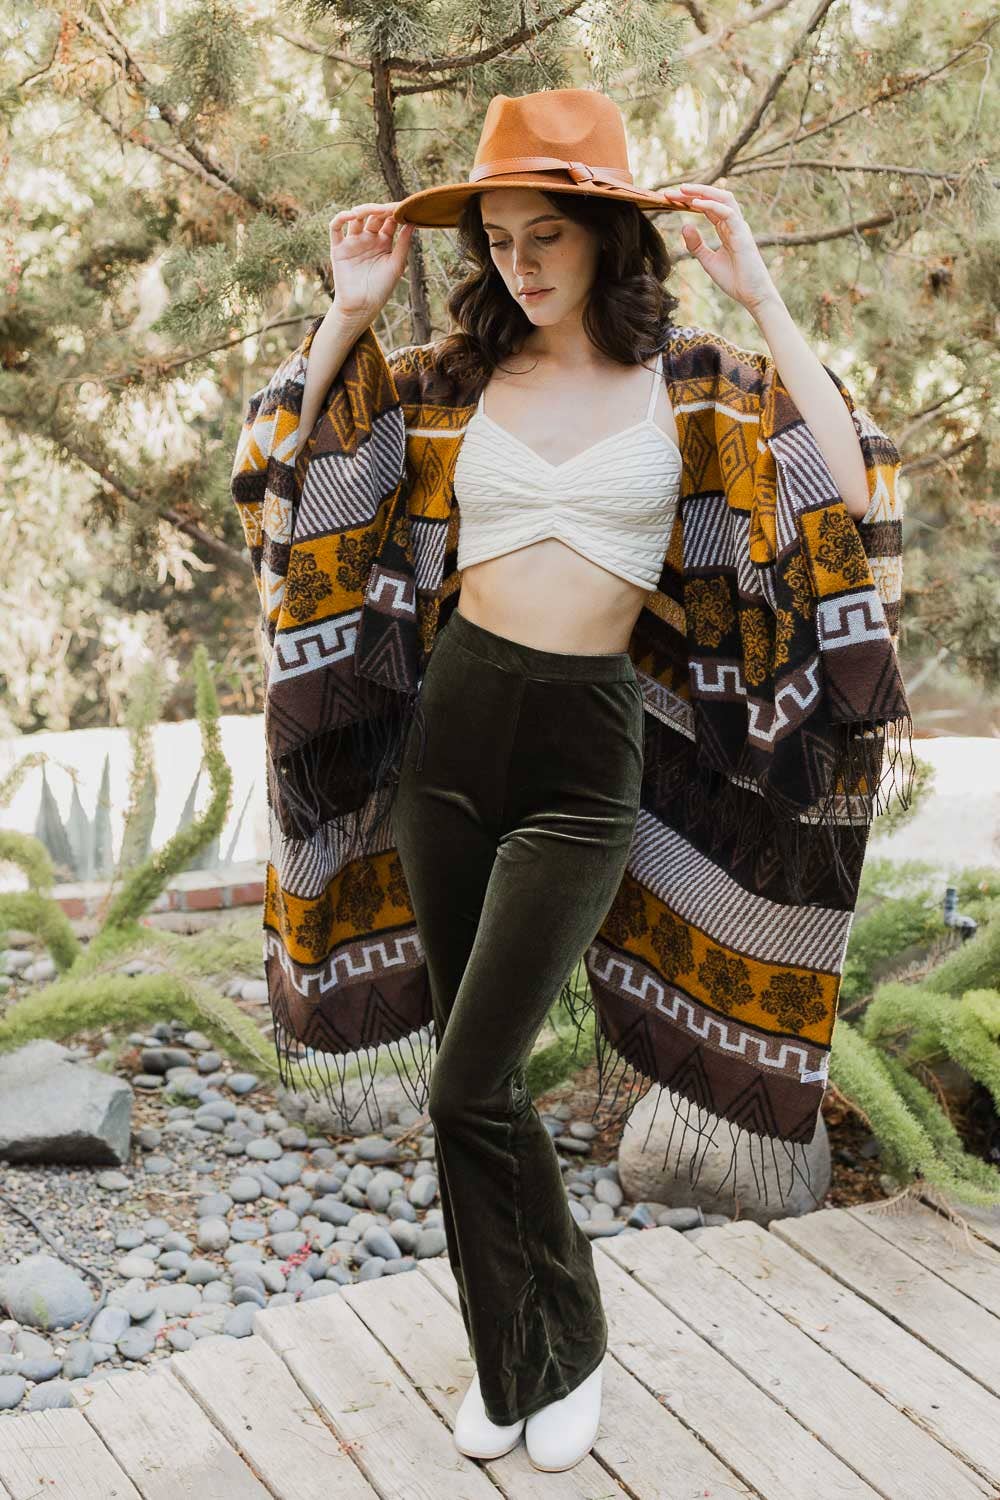 model is wearing an Aztec-printed ruana in an outdoor setting